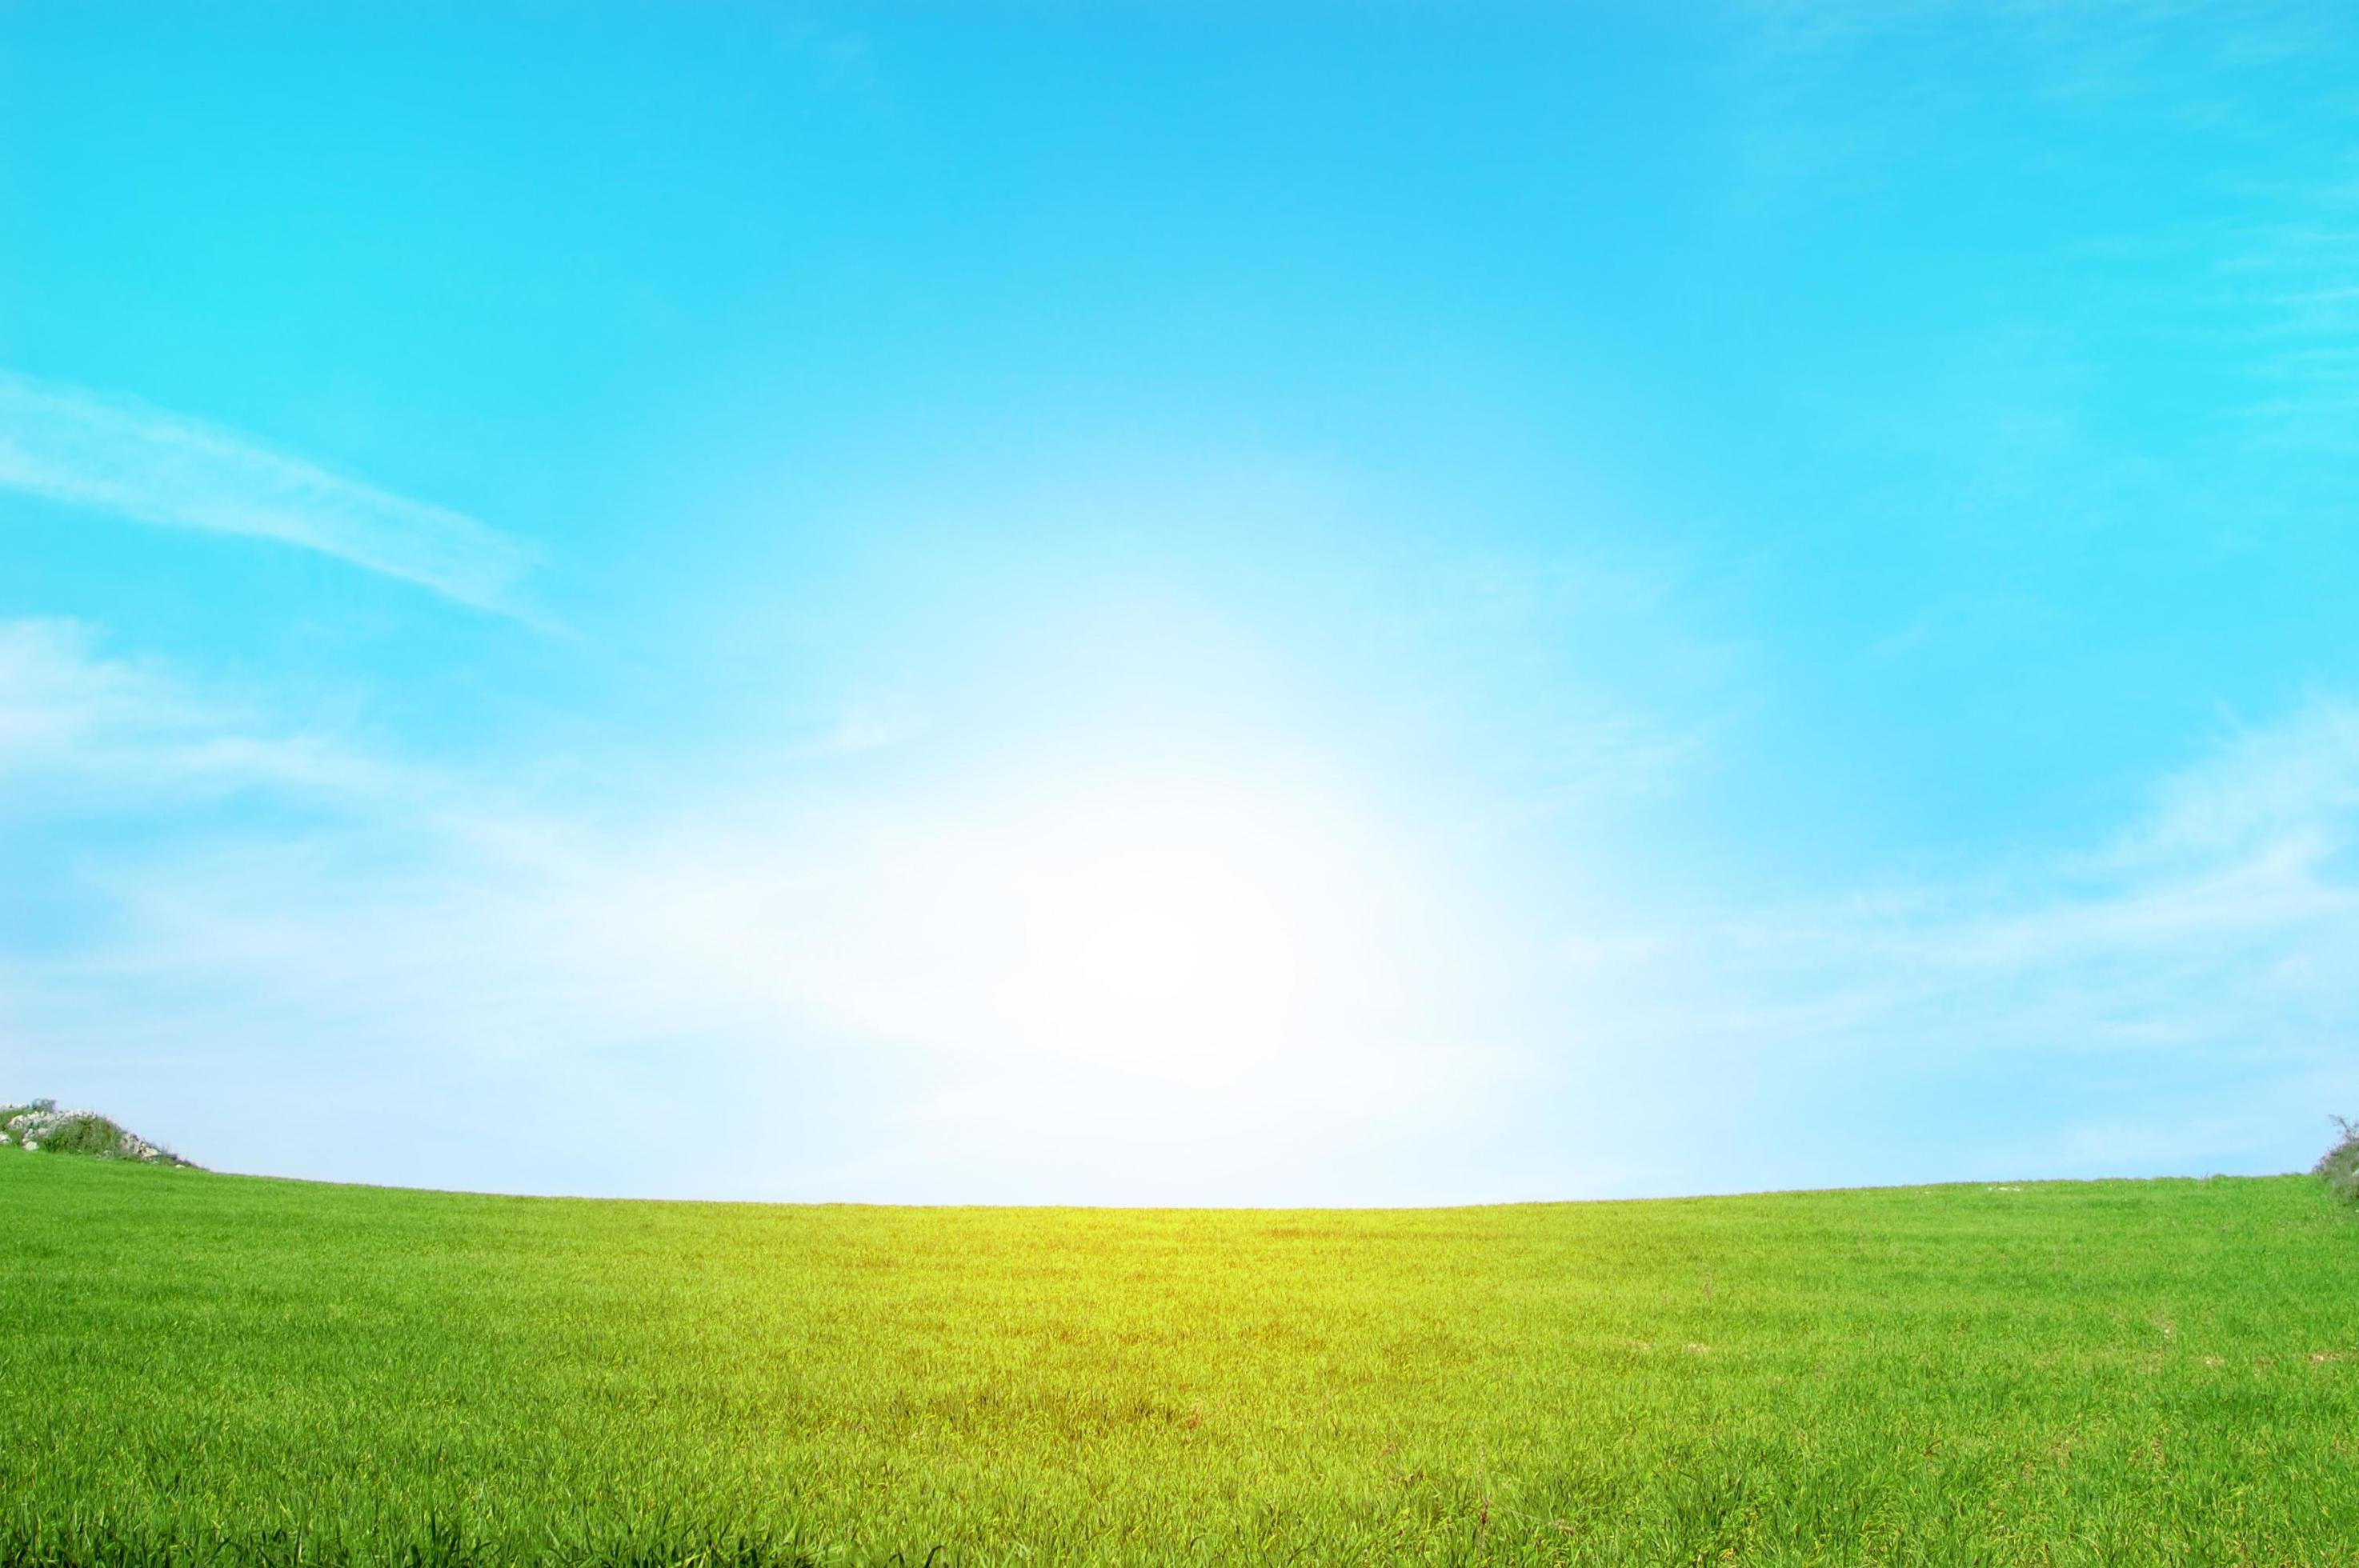 Blue sky and grass sunburst background Royalty Free Vector